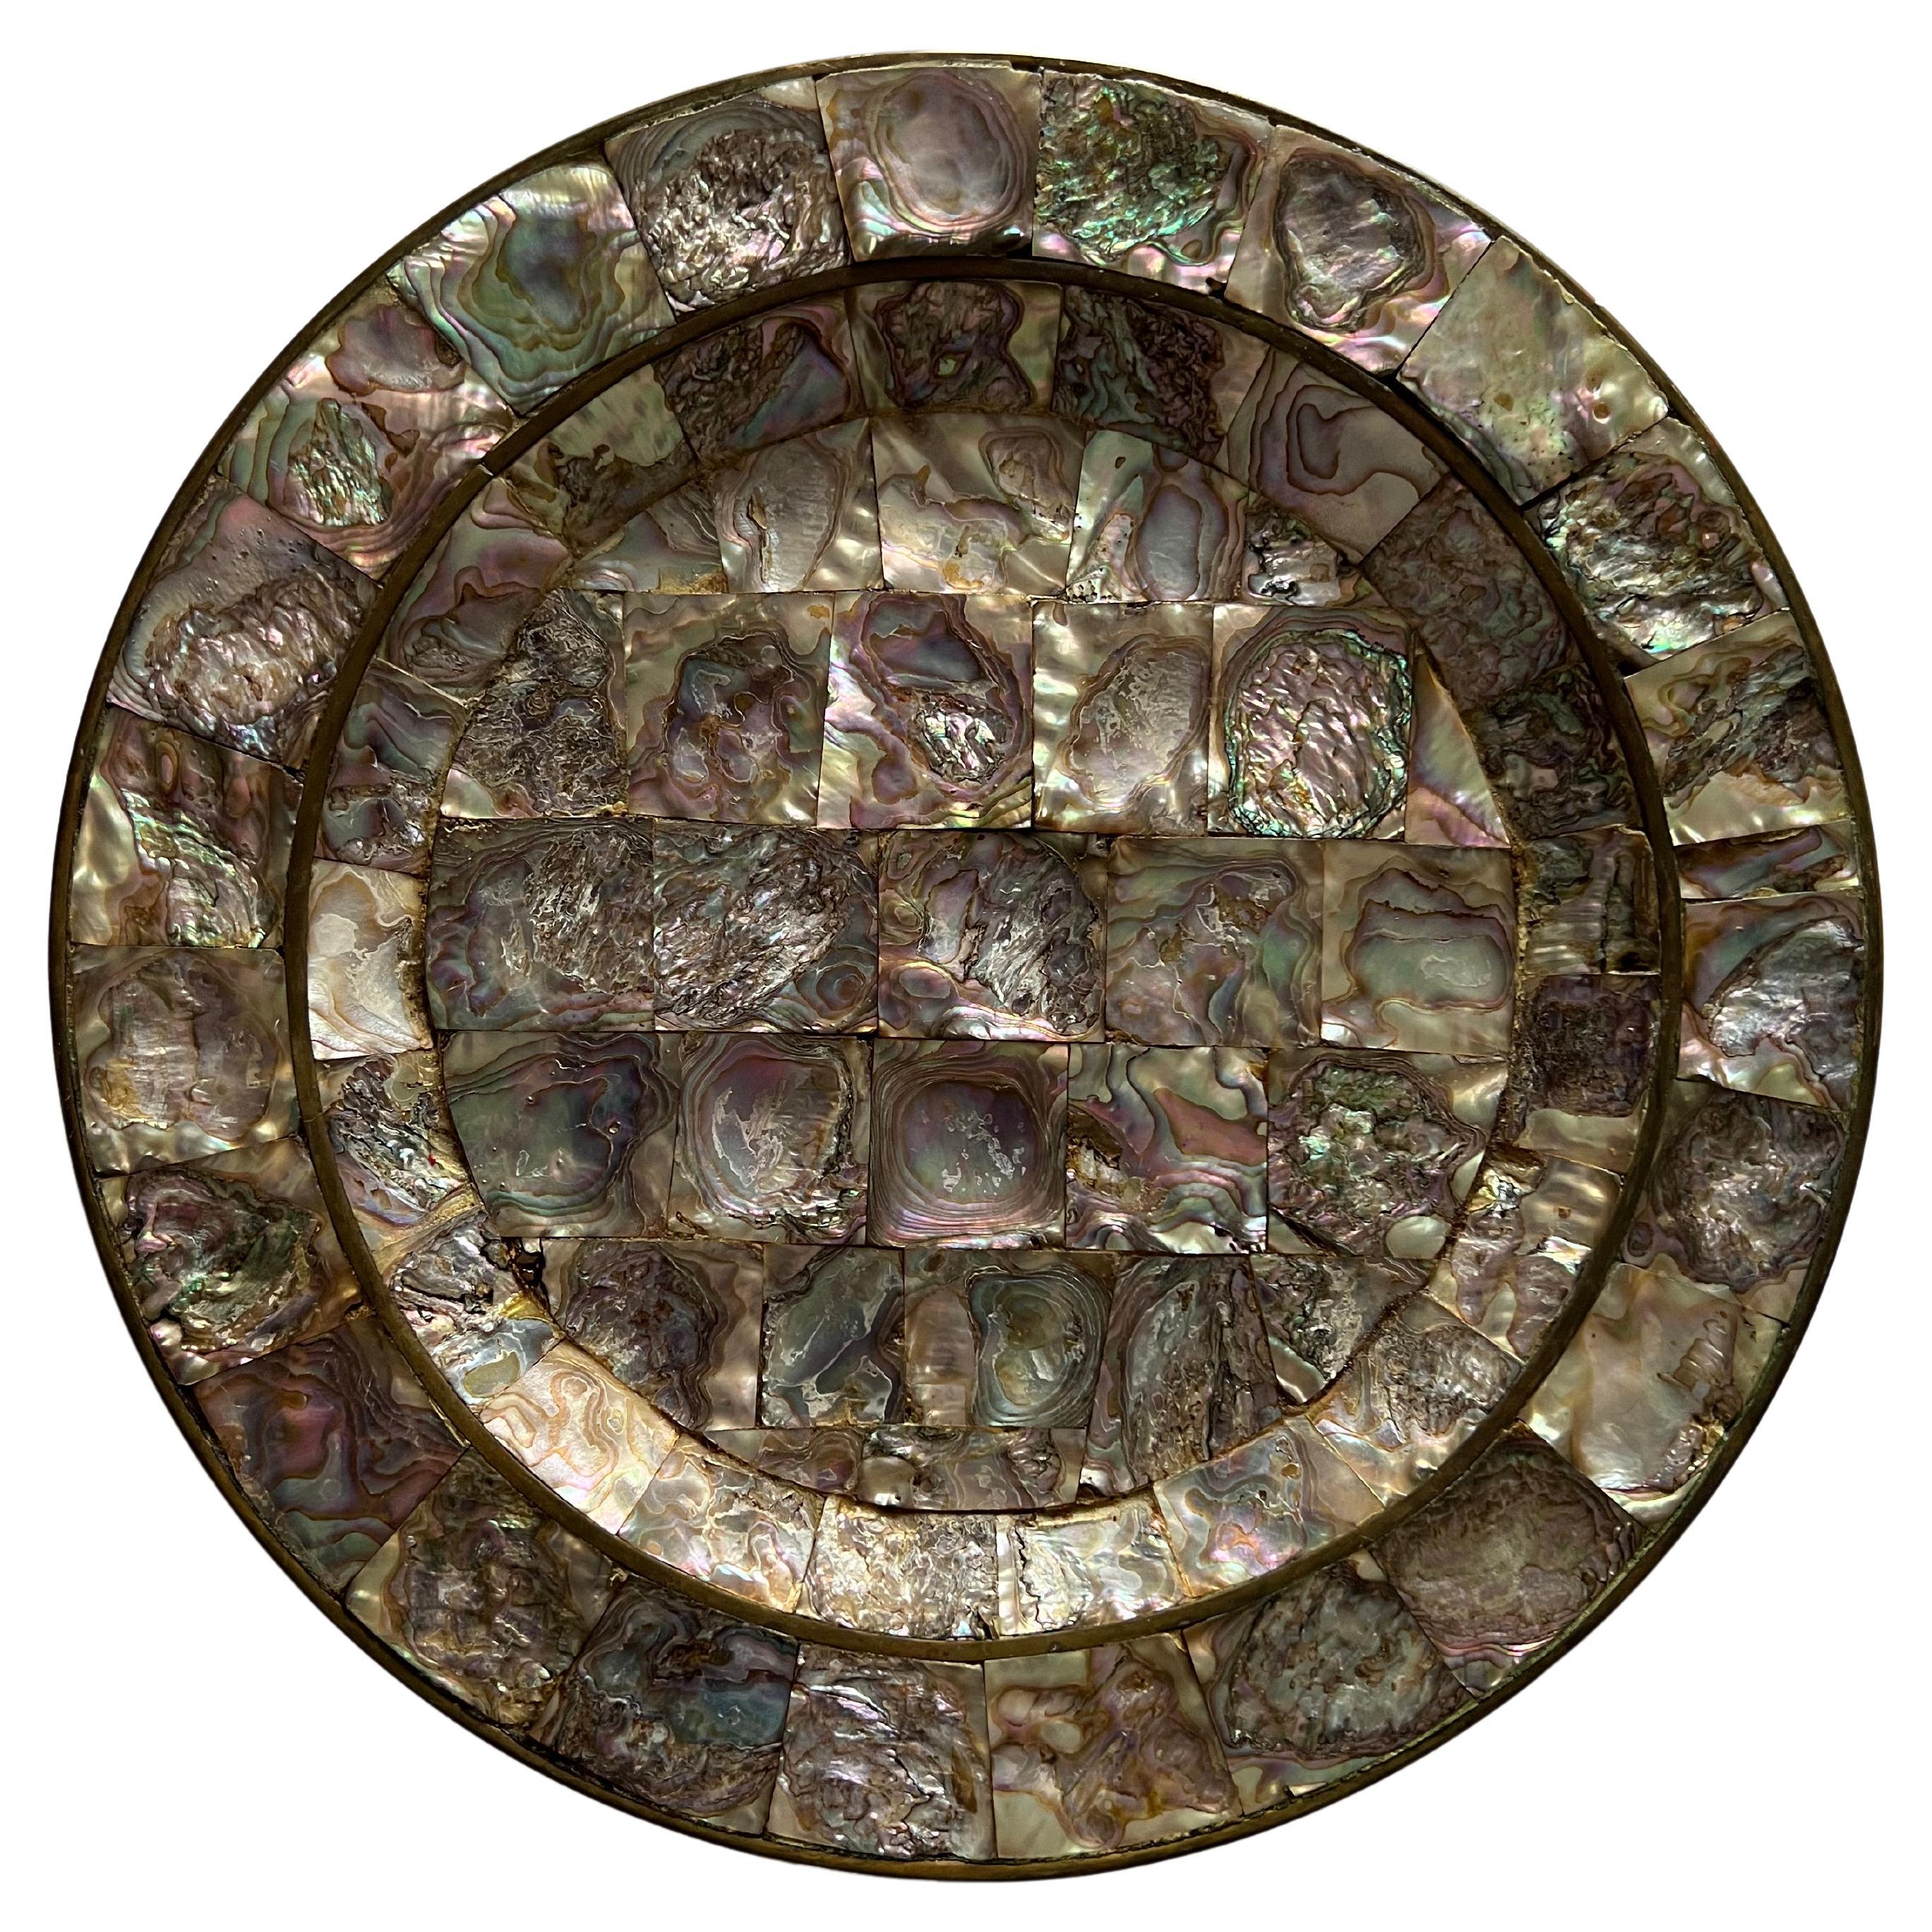 Los Castillos Style Mosaic of Abalone Shells on Copper Platter, 1950s, Mexico